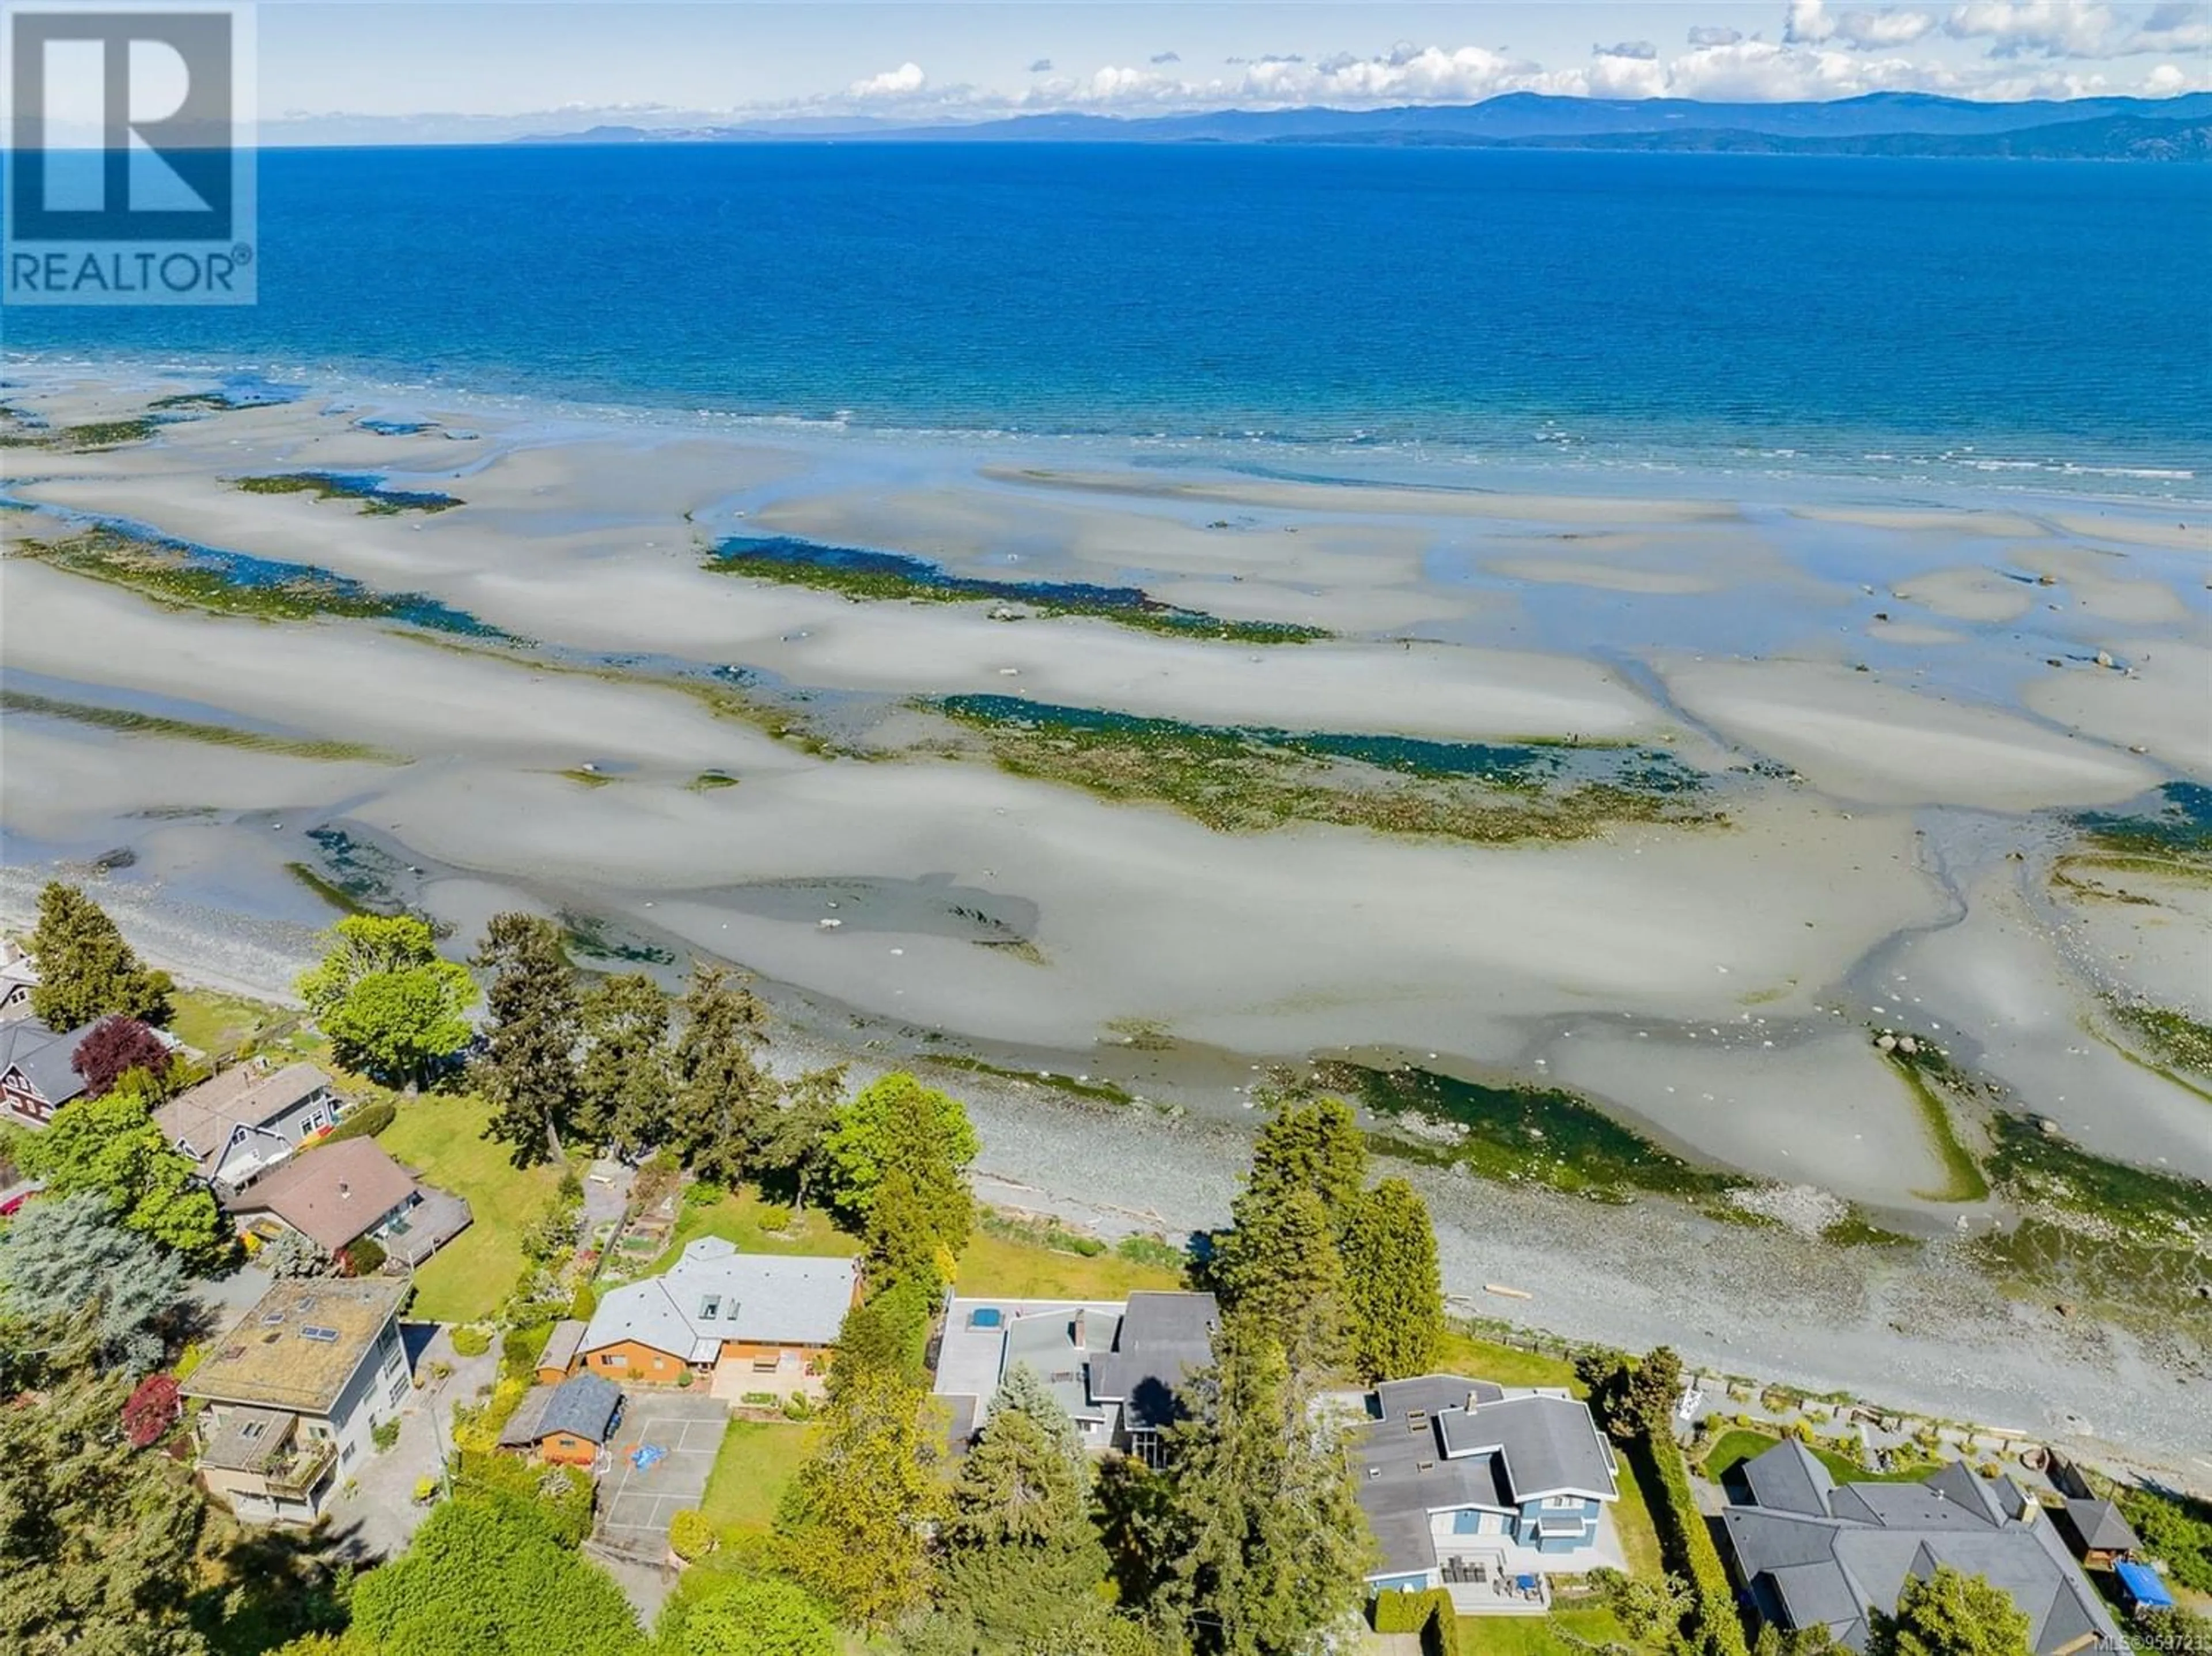 Lakeview for 1141 Butterball Dr, Qualicum Beach British Columbia V9K1C7